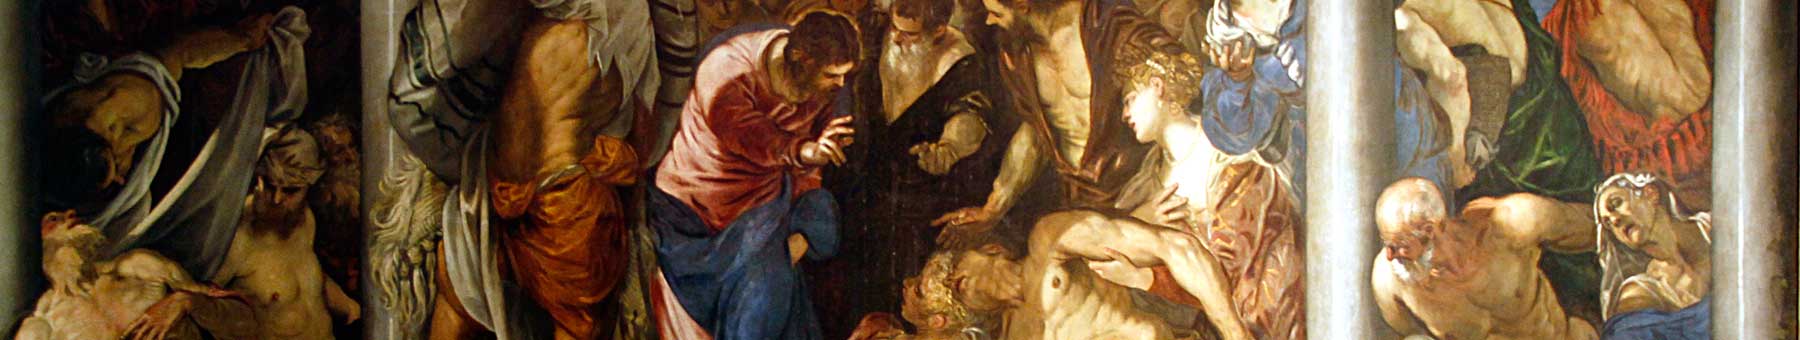 Detail from Jacopo Tintoretto, The Healing of the Paralytic